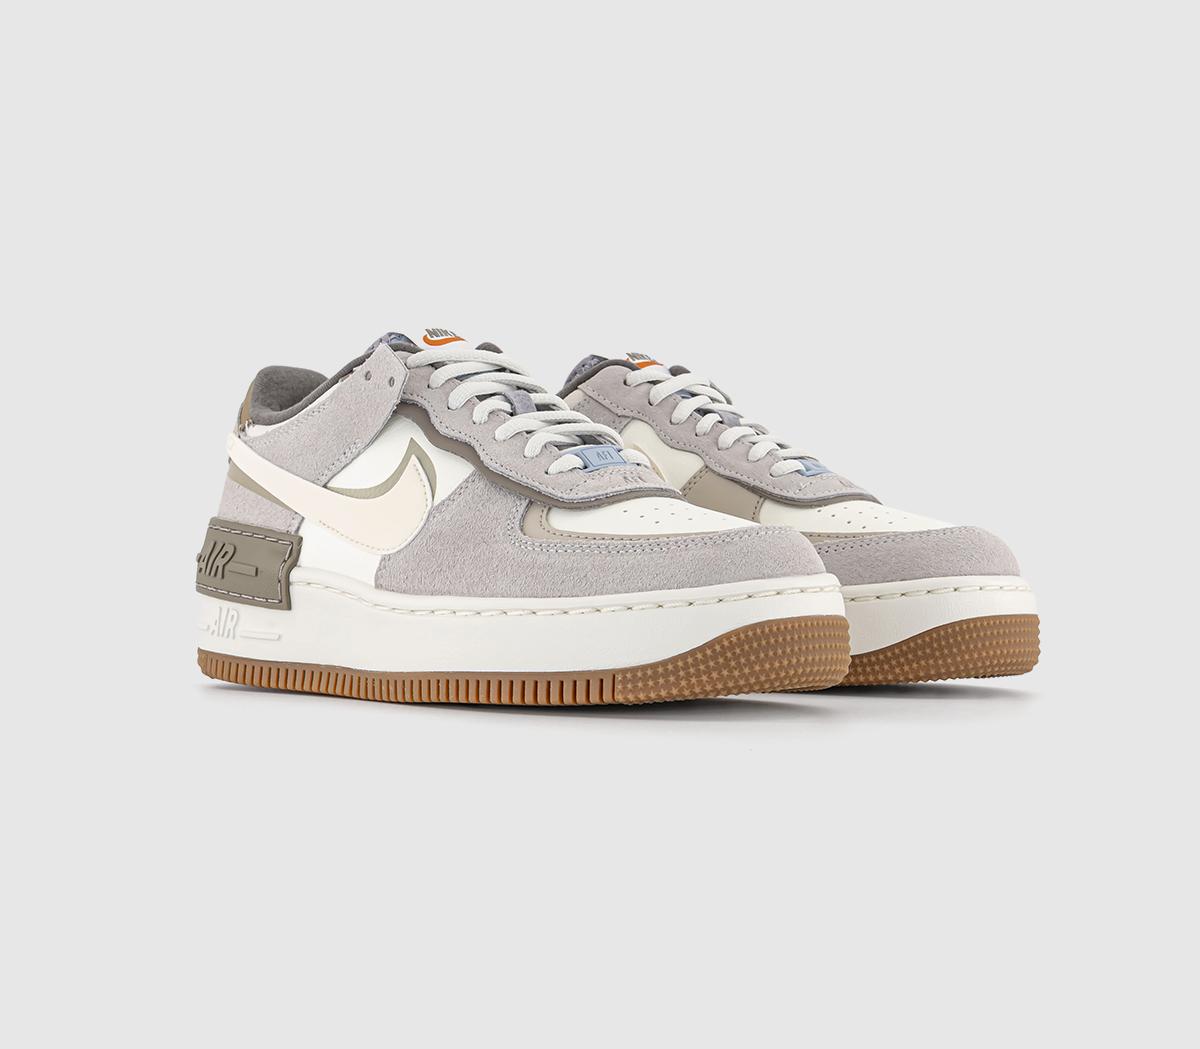 Nike Air Force 1 Shadow Trainers Sail Pale Ivory Grey Fog Provence Purple Cave White, 4